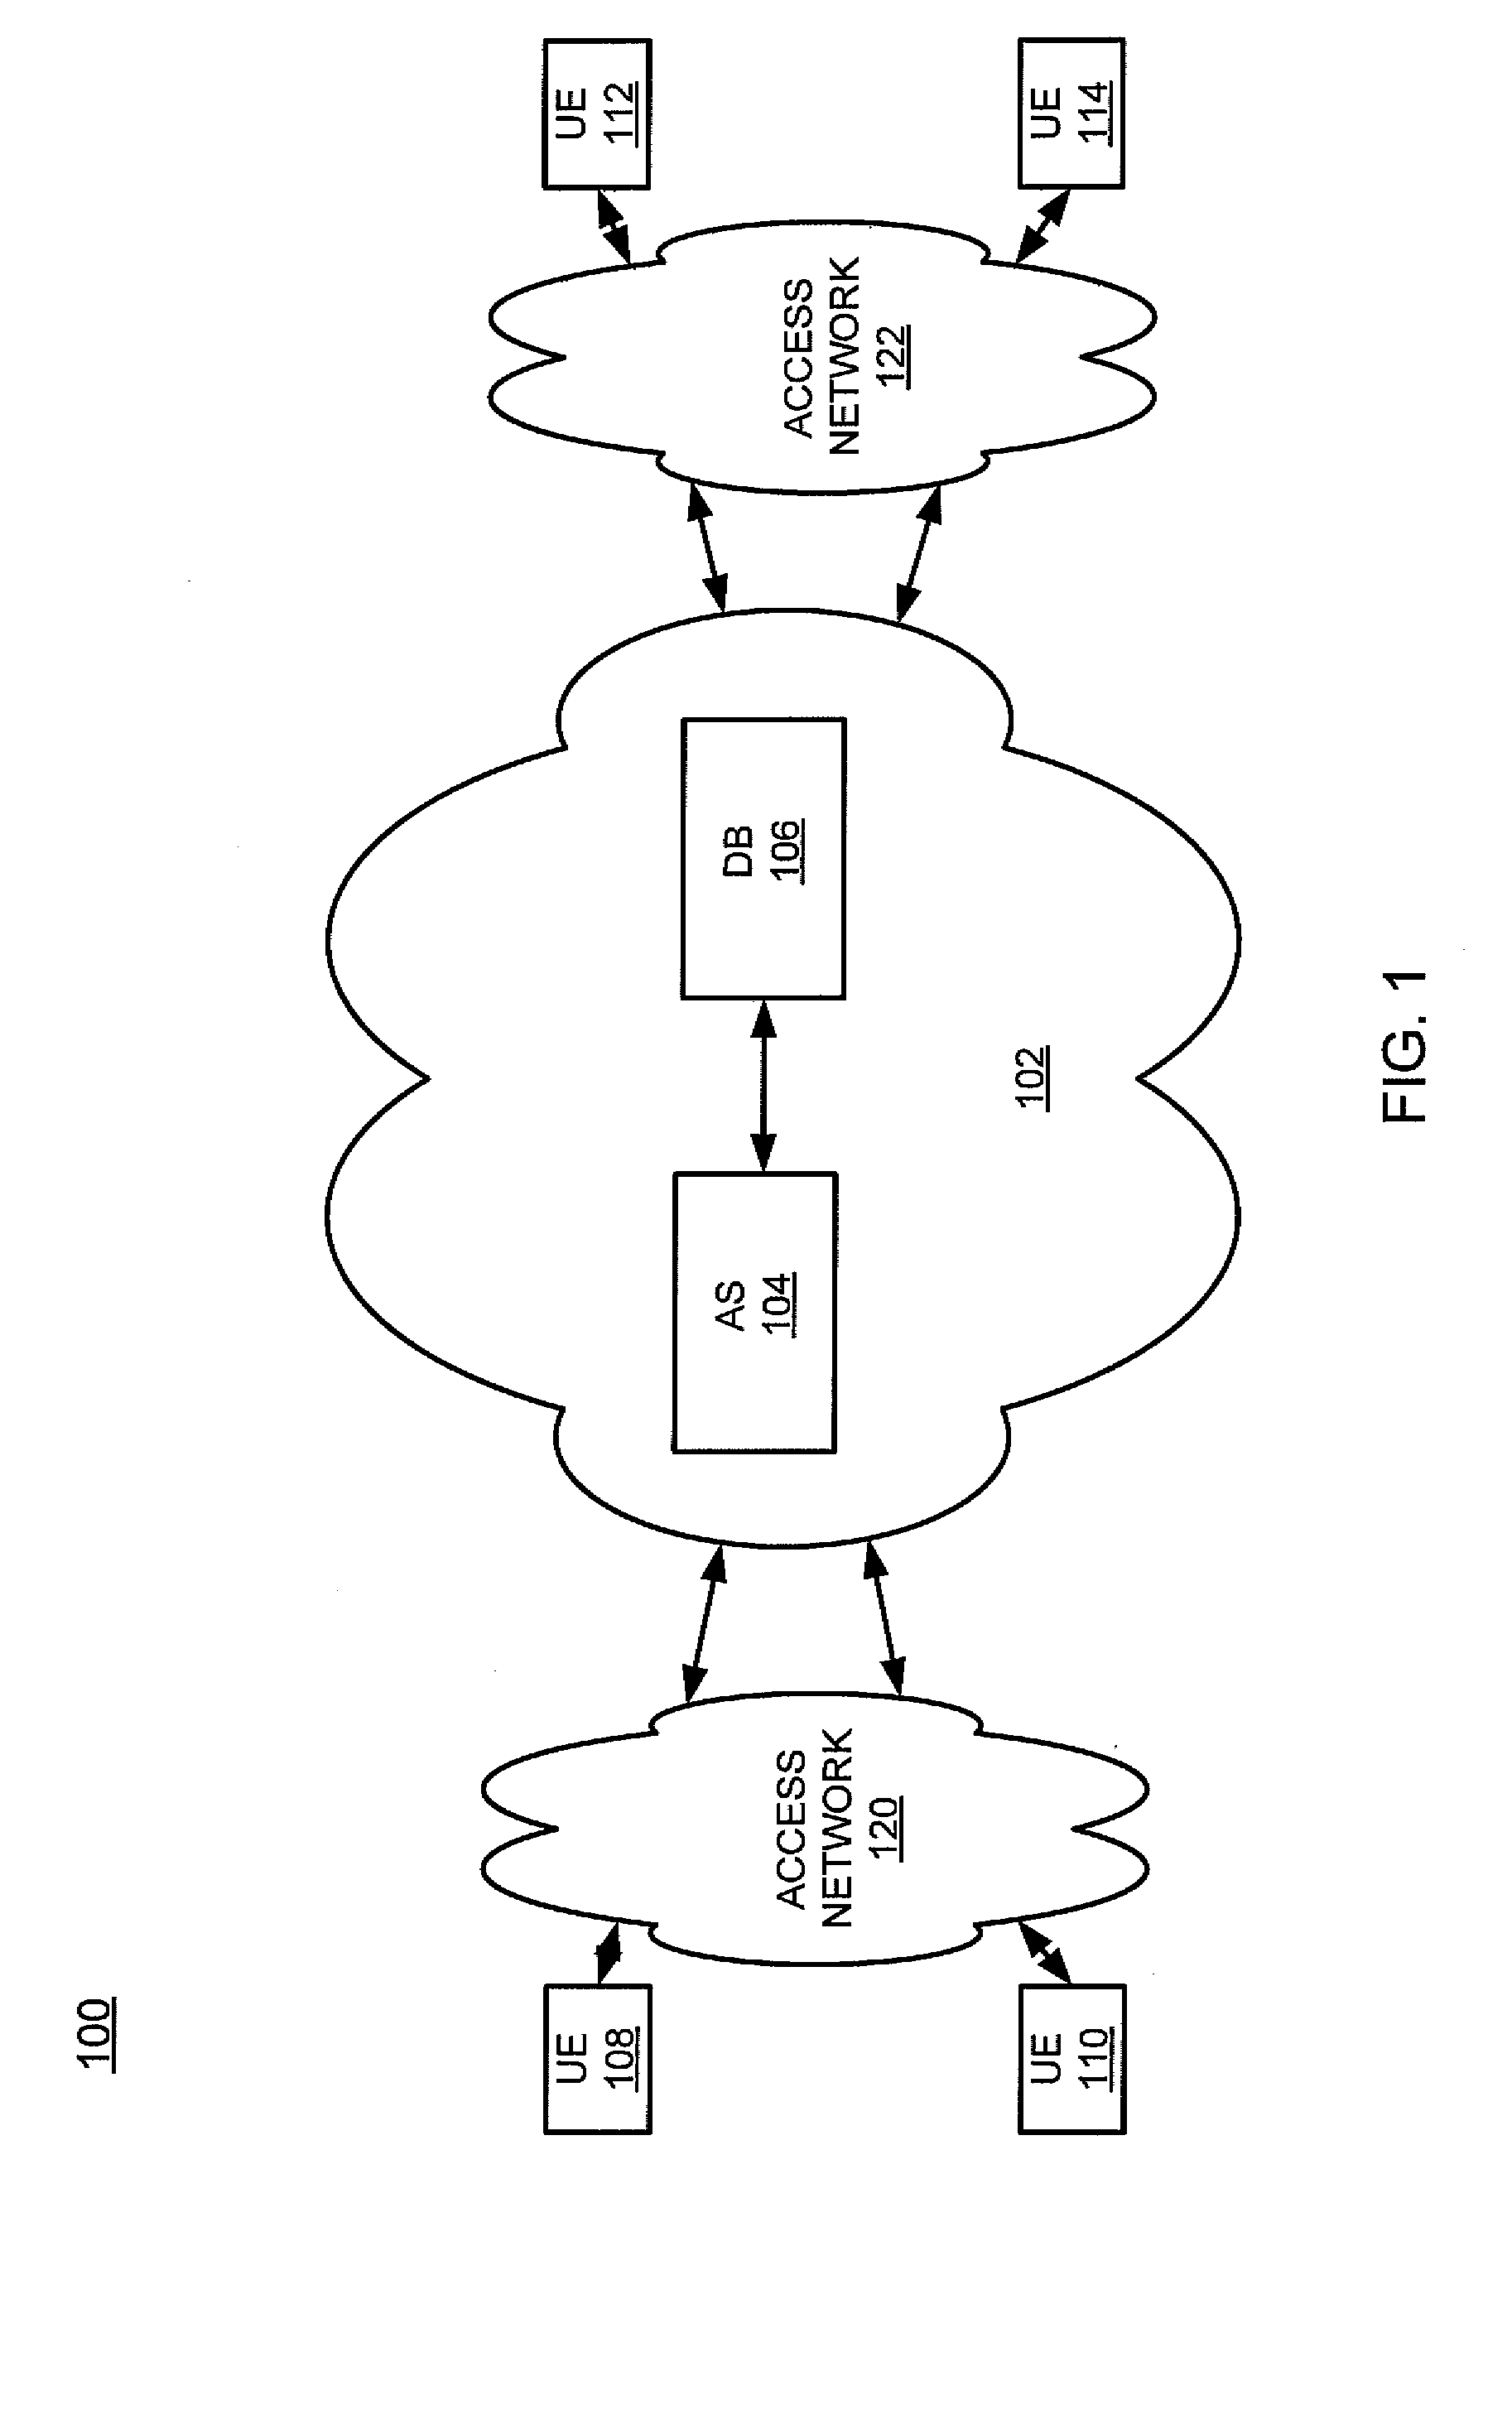 Method and apparatus for automatically summarizing the contents of electronic documents